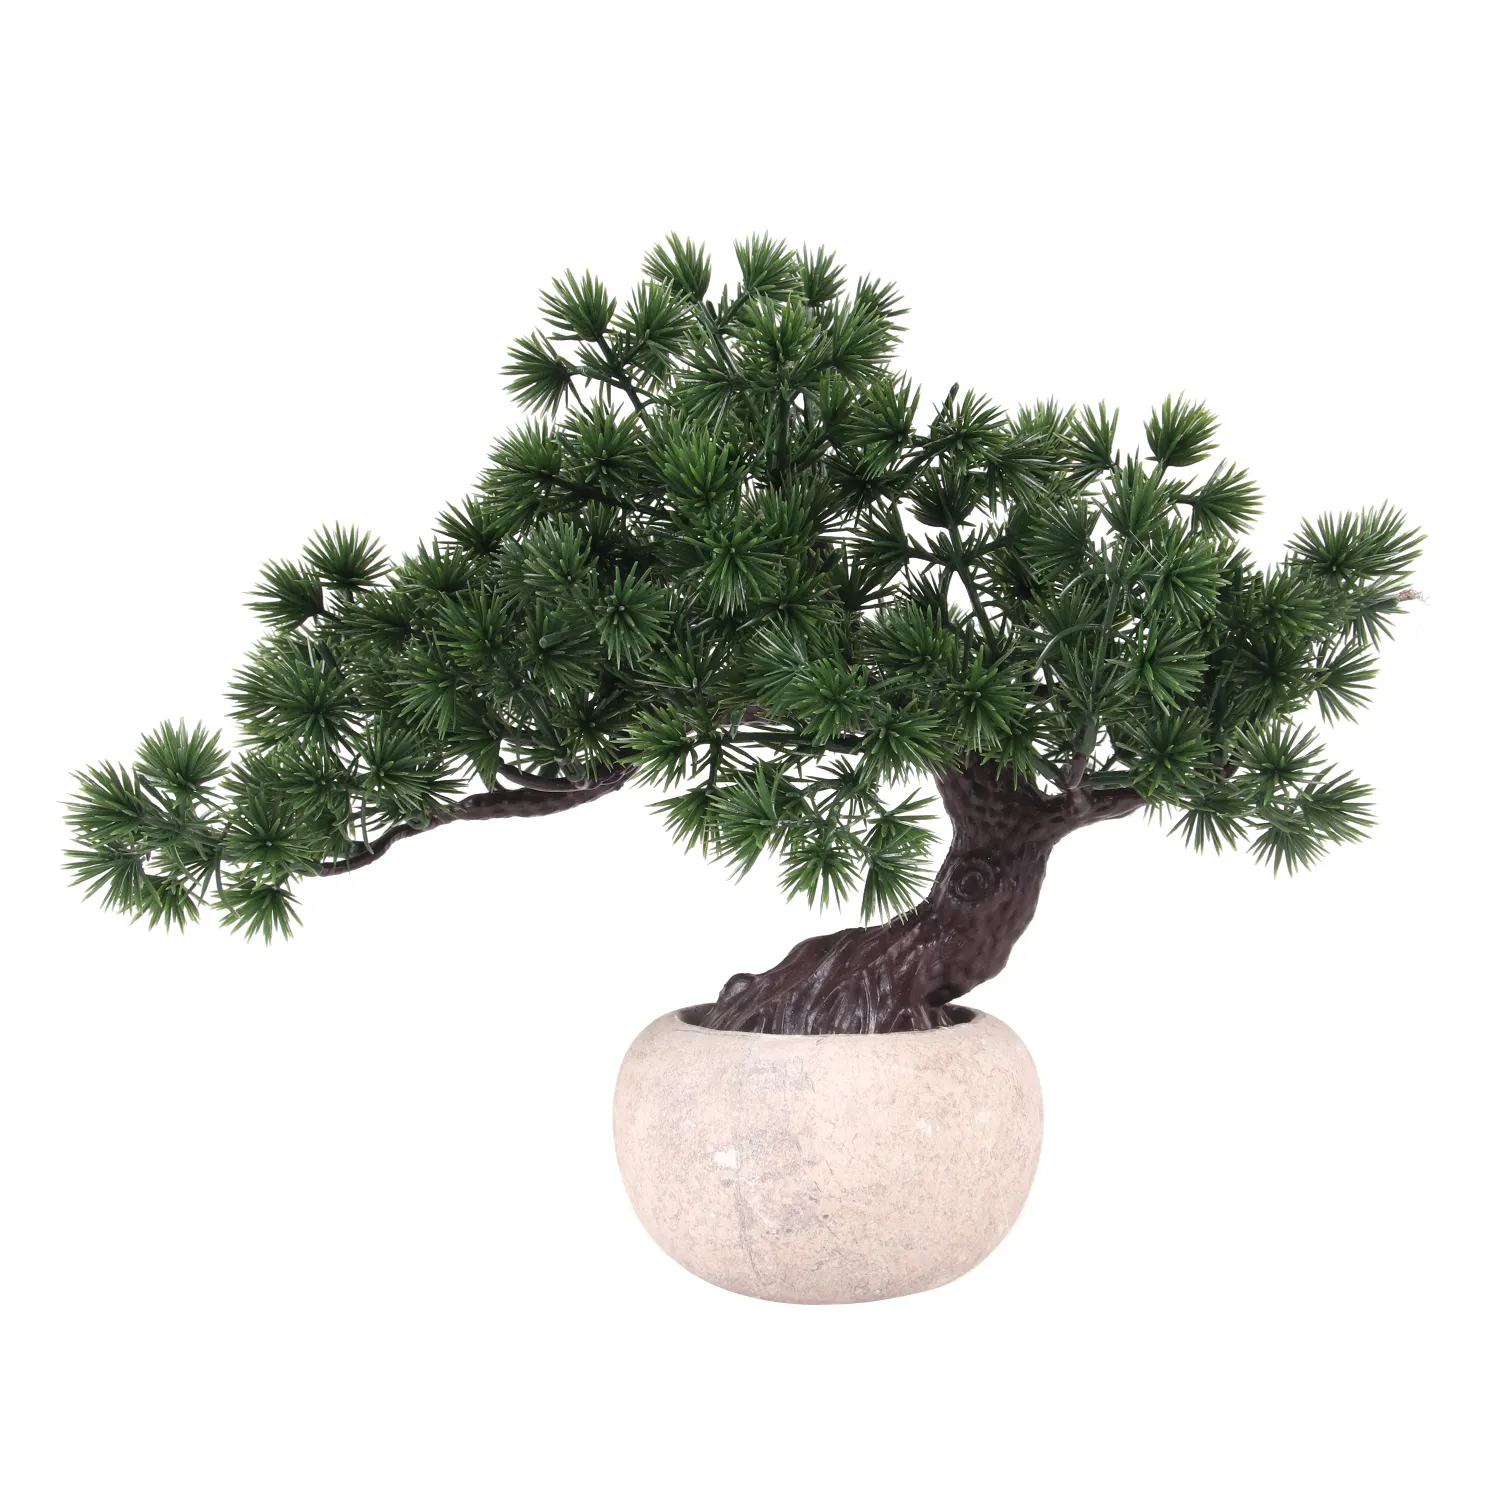 Artificial Bonsai Tree G51 High Simulation Indoor Decorative Faux Artificial Potted Pine Tree Cypress Japanese Bonsai Plants